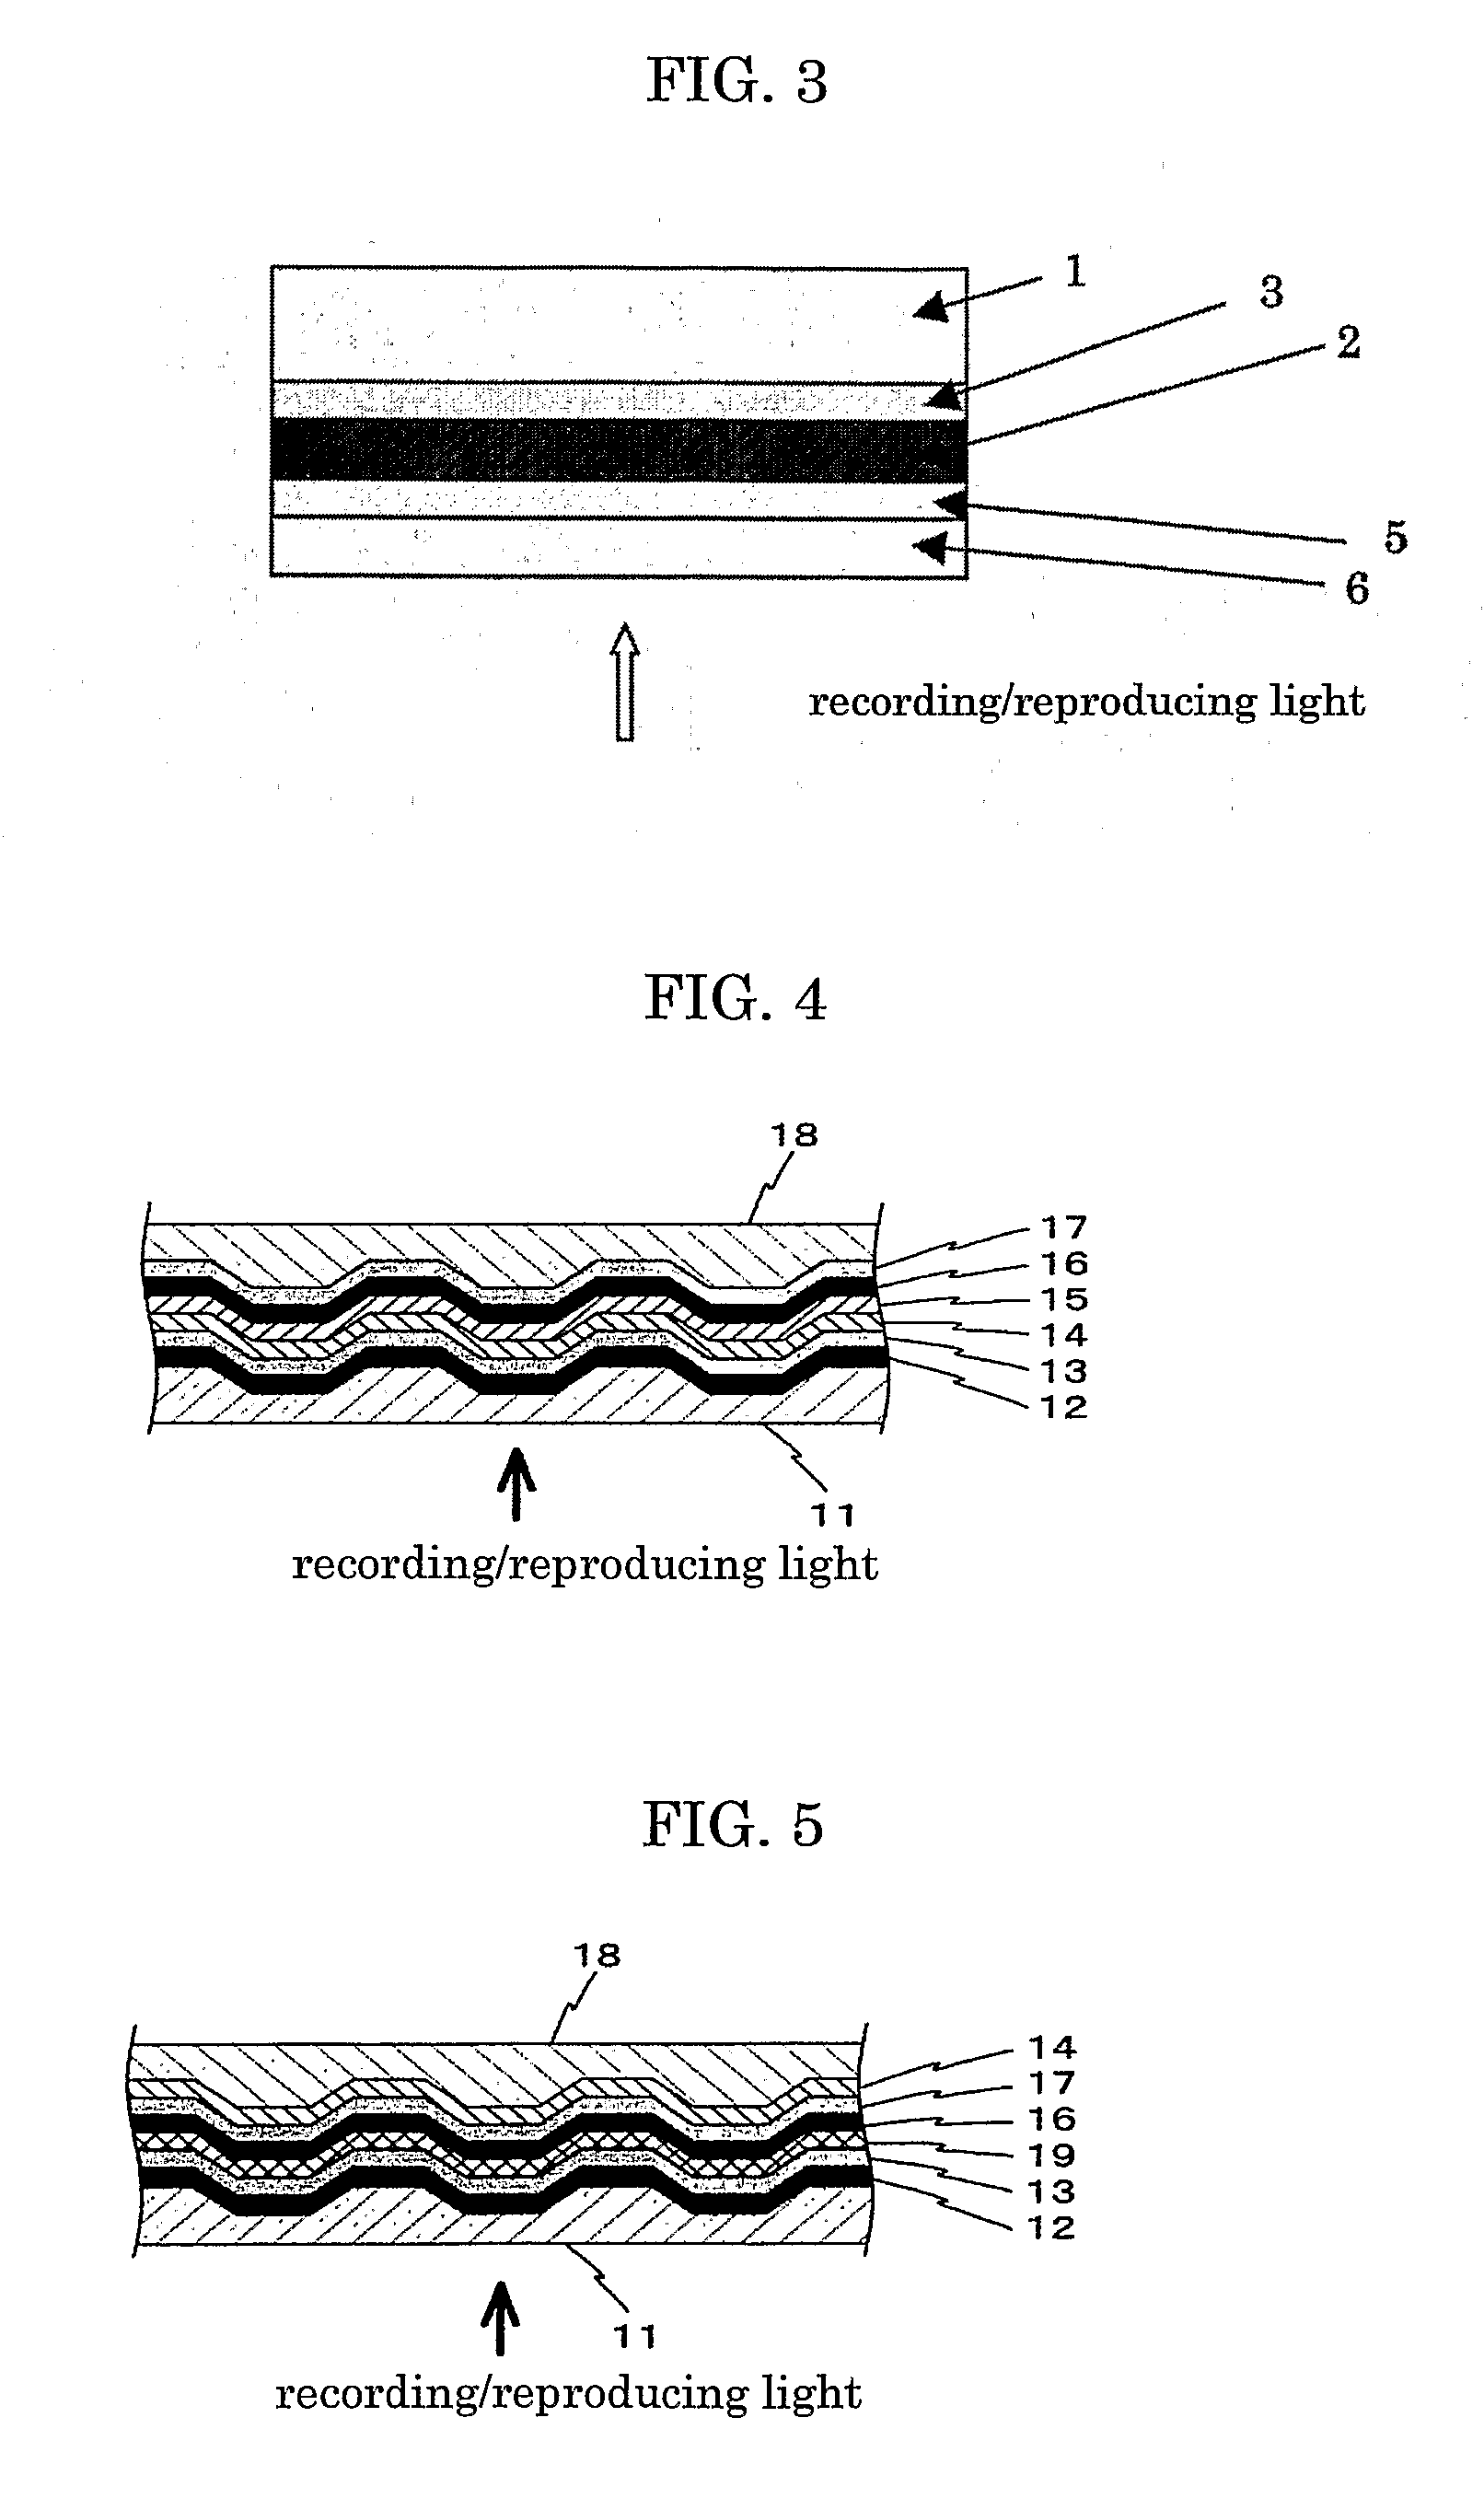 Optical recording medium, optical recording apparatus, and system to prepare contents-recorded optical recording medium